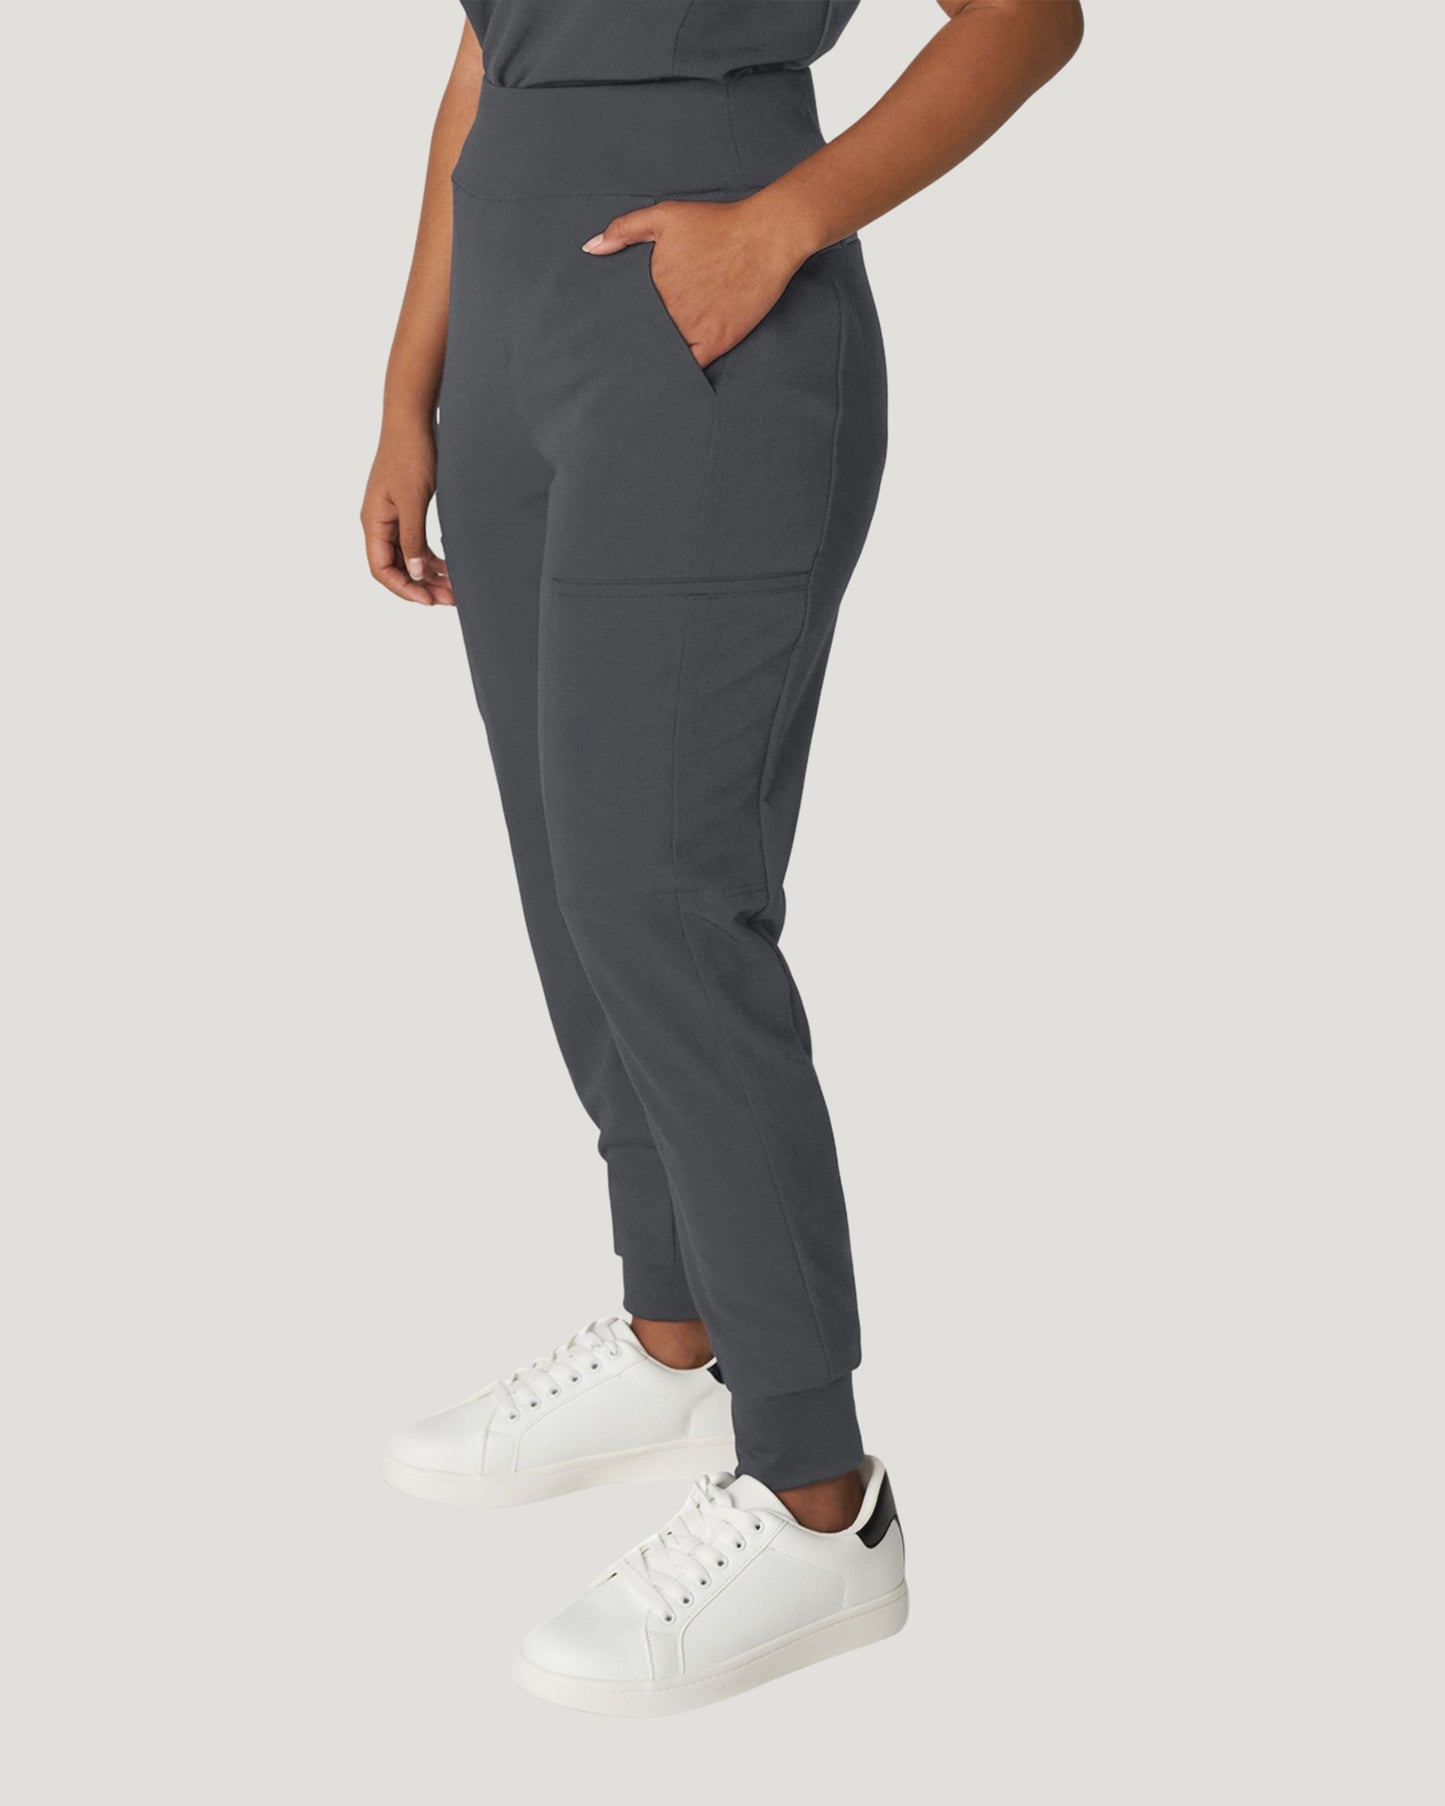 WB410 White Cross V-Tess Women's Jogger Pants with Jersey Knit Contrast 6 Pockets